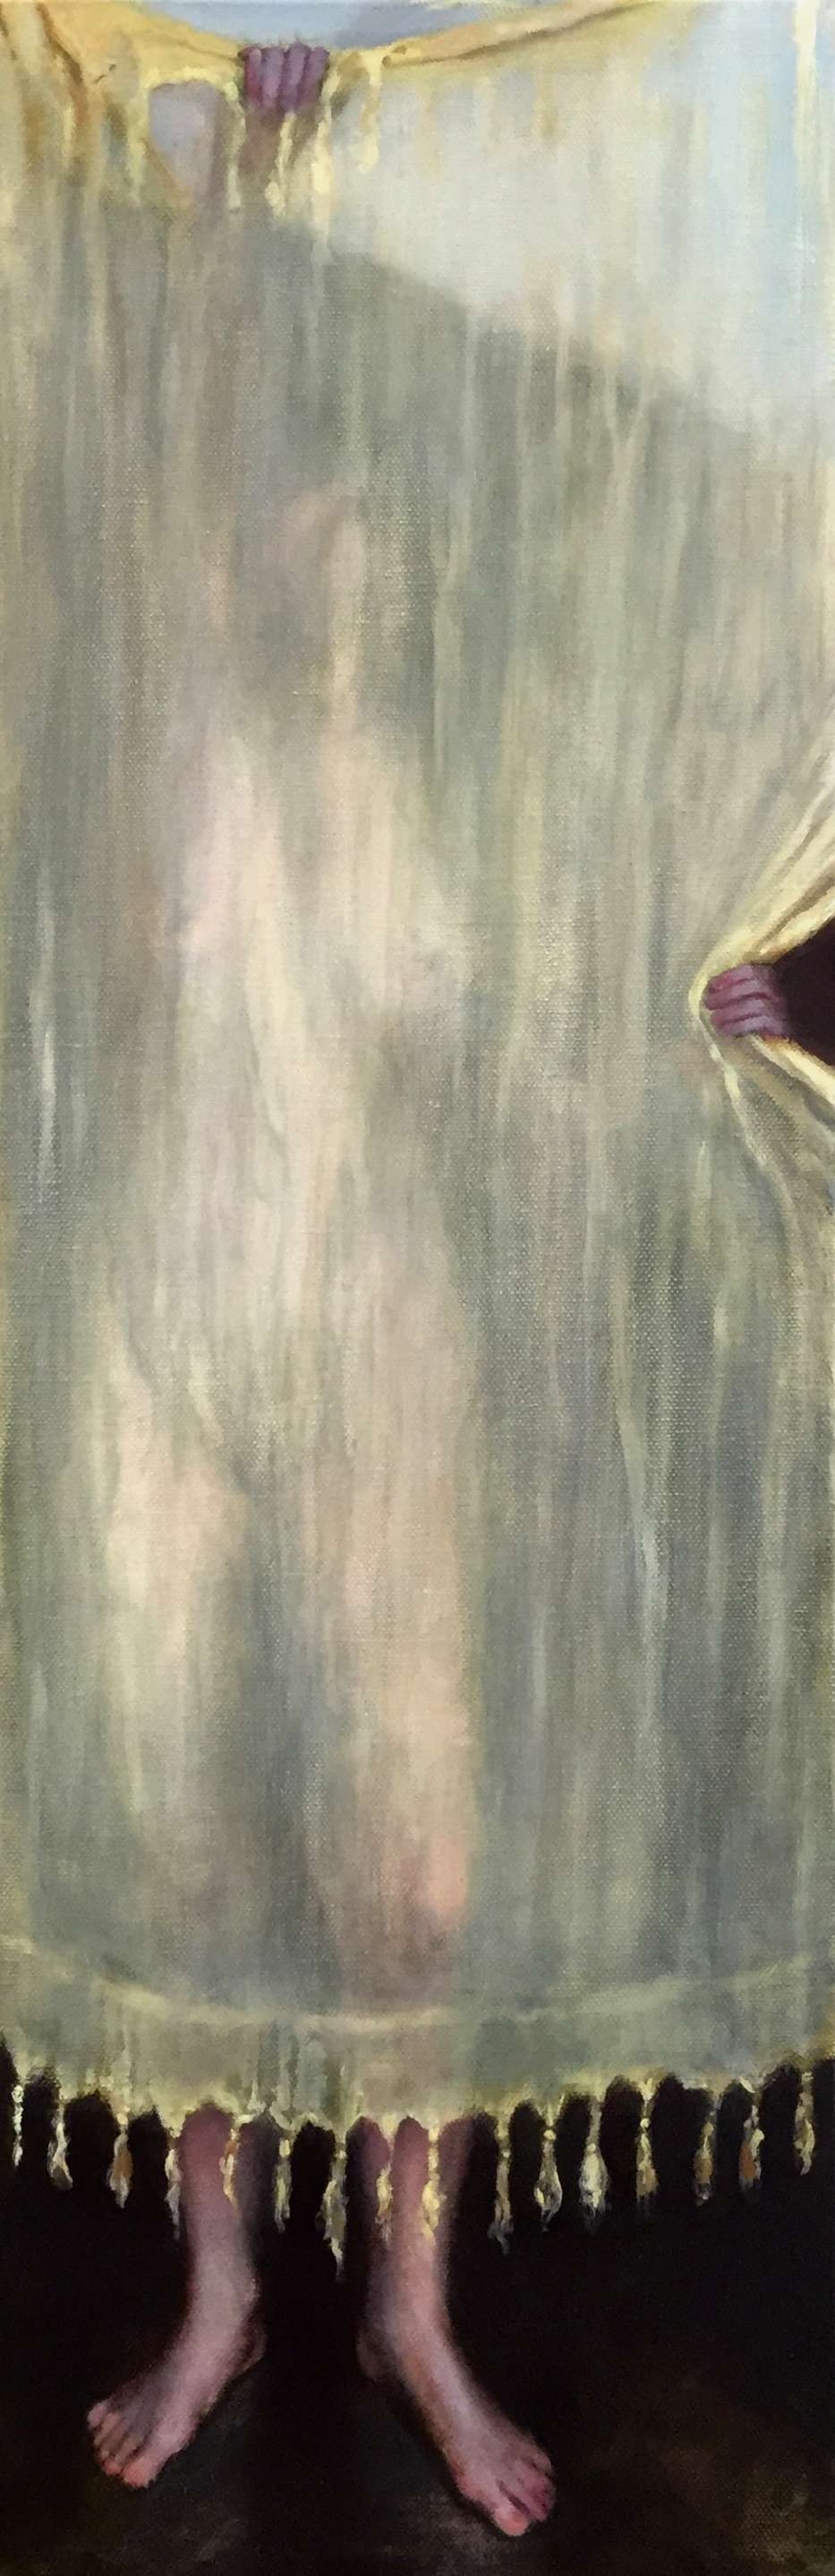   CONCEAL AND REVEAL  oil on canvas 24” x 8” 2016 